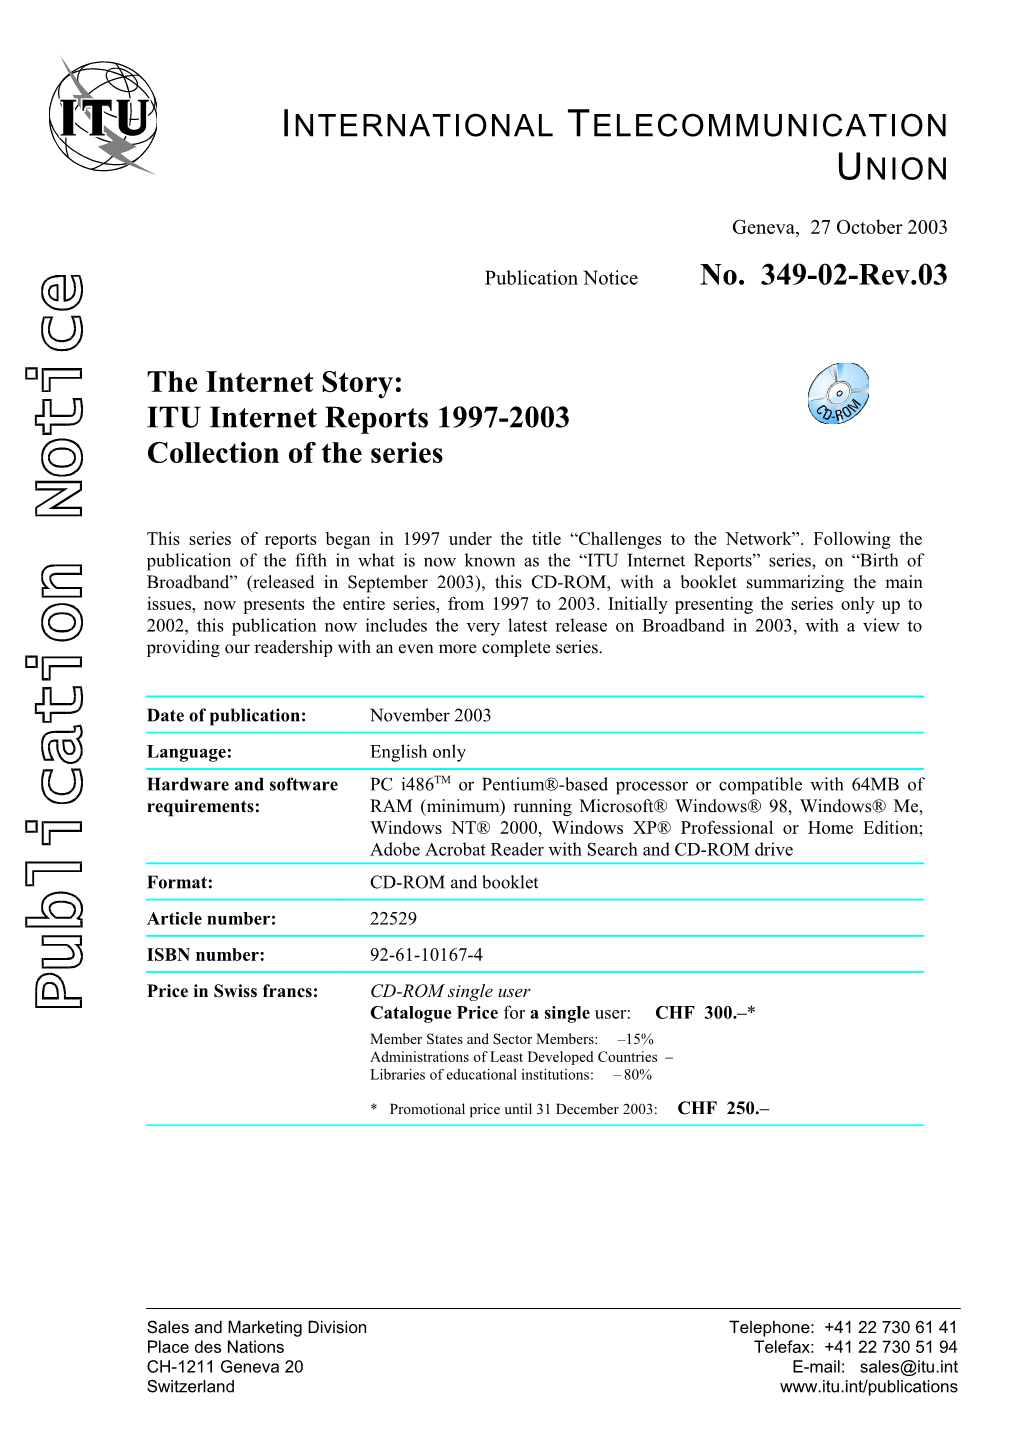 Publication Notice No. 347-02 the Internet Story: ITU Internet Reports 1997-2003 Collection